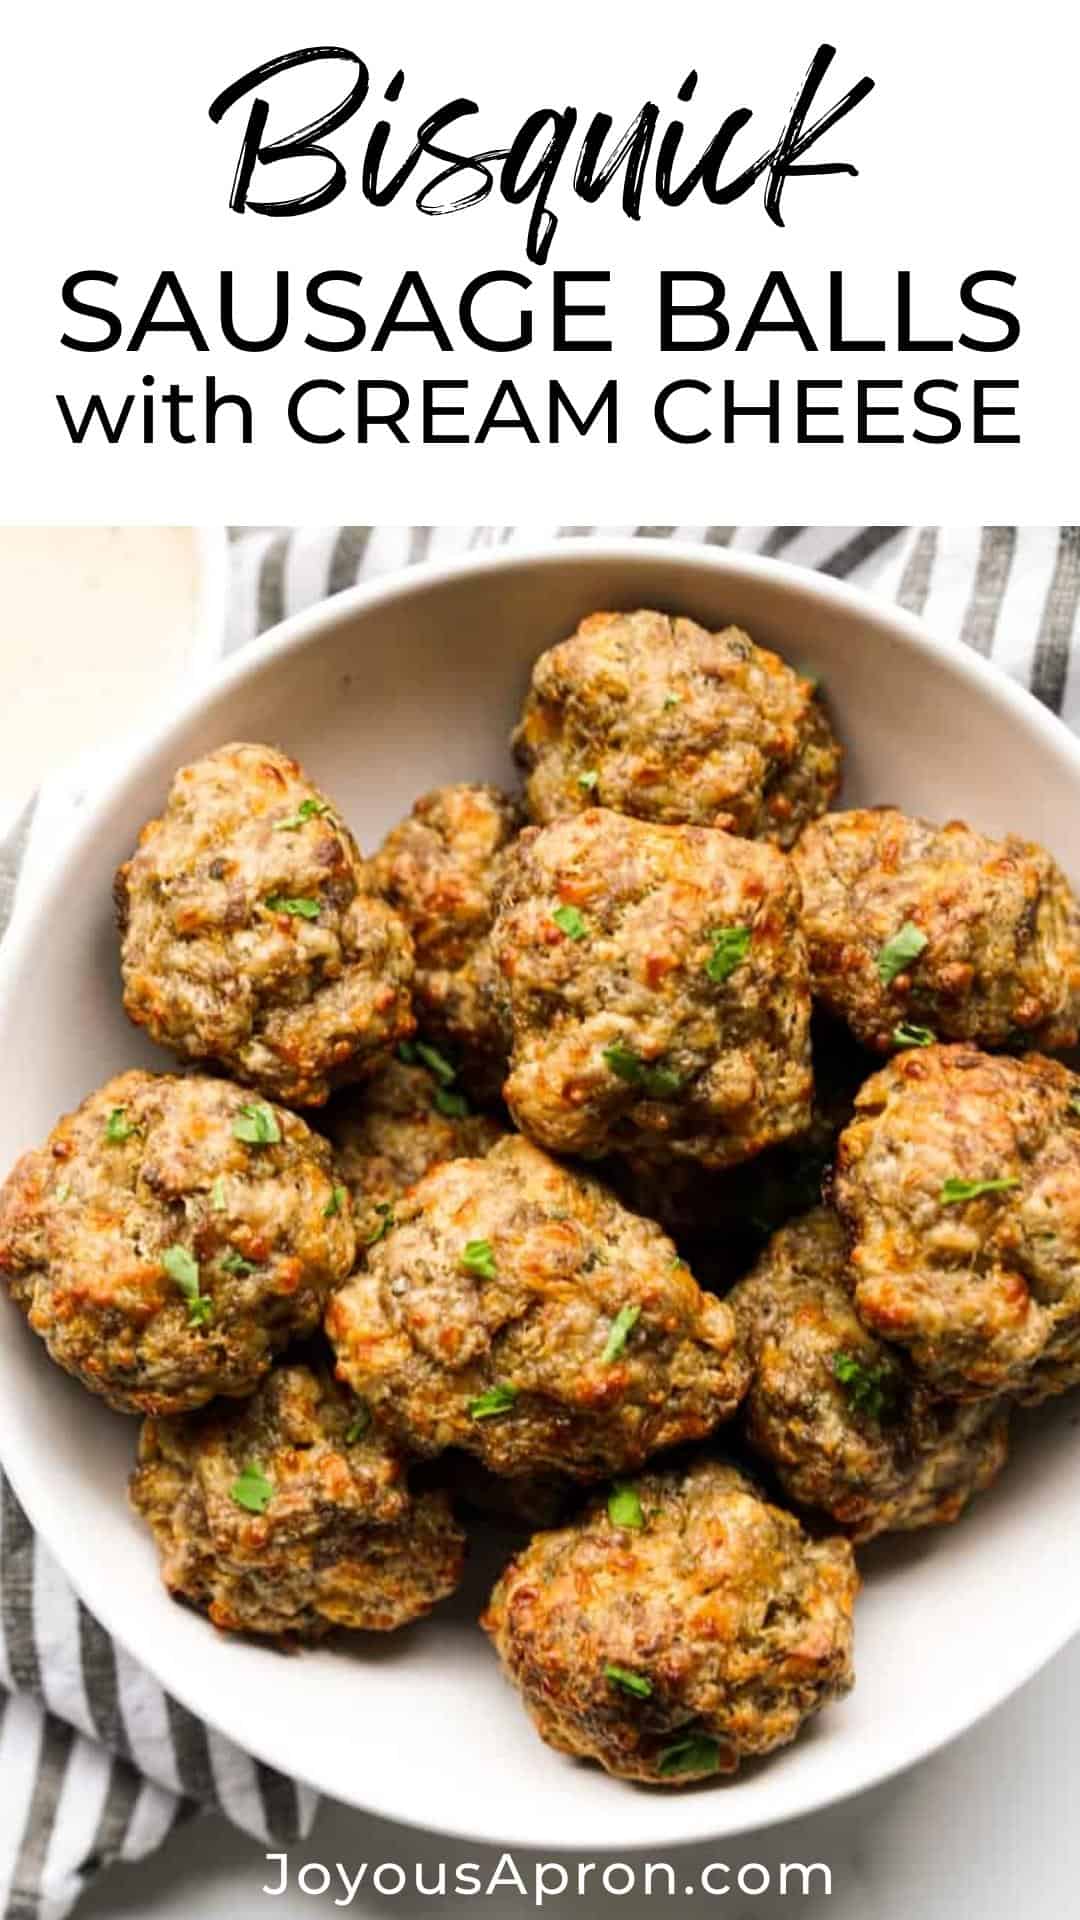 Cream Cheese Sausage Balls - the perfect appetizer, finger food and party food for game day and Superbowl Sunday. A combination of ground sausage, cream cheese, Bisquick mix, cheddar and herbs make these sausage balls moist and flavorful. via @joyousapron